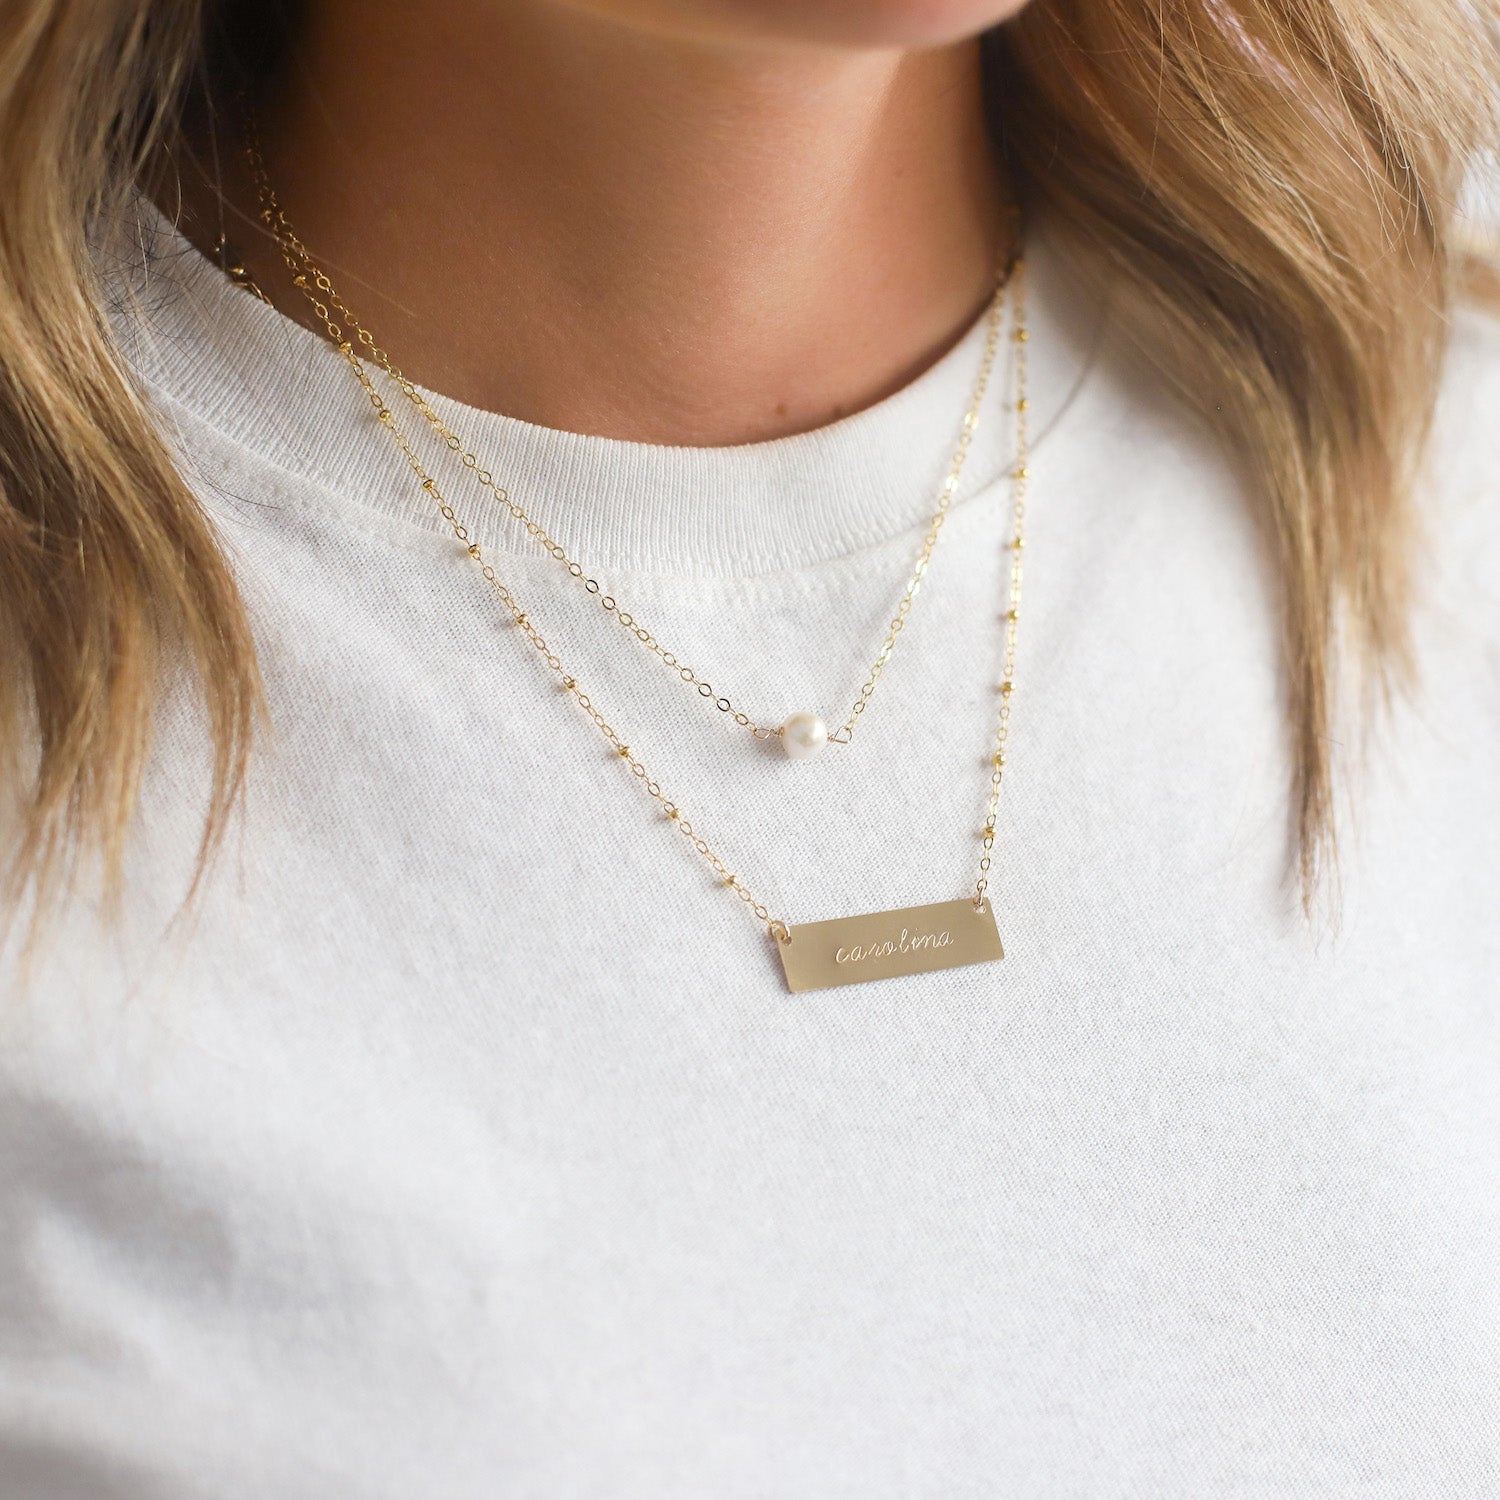 Make It Personal Plate Necklace